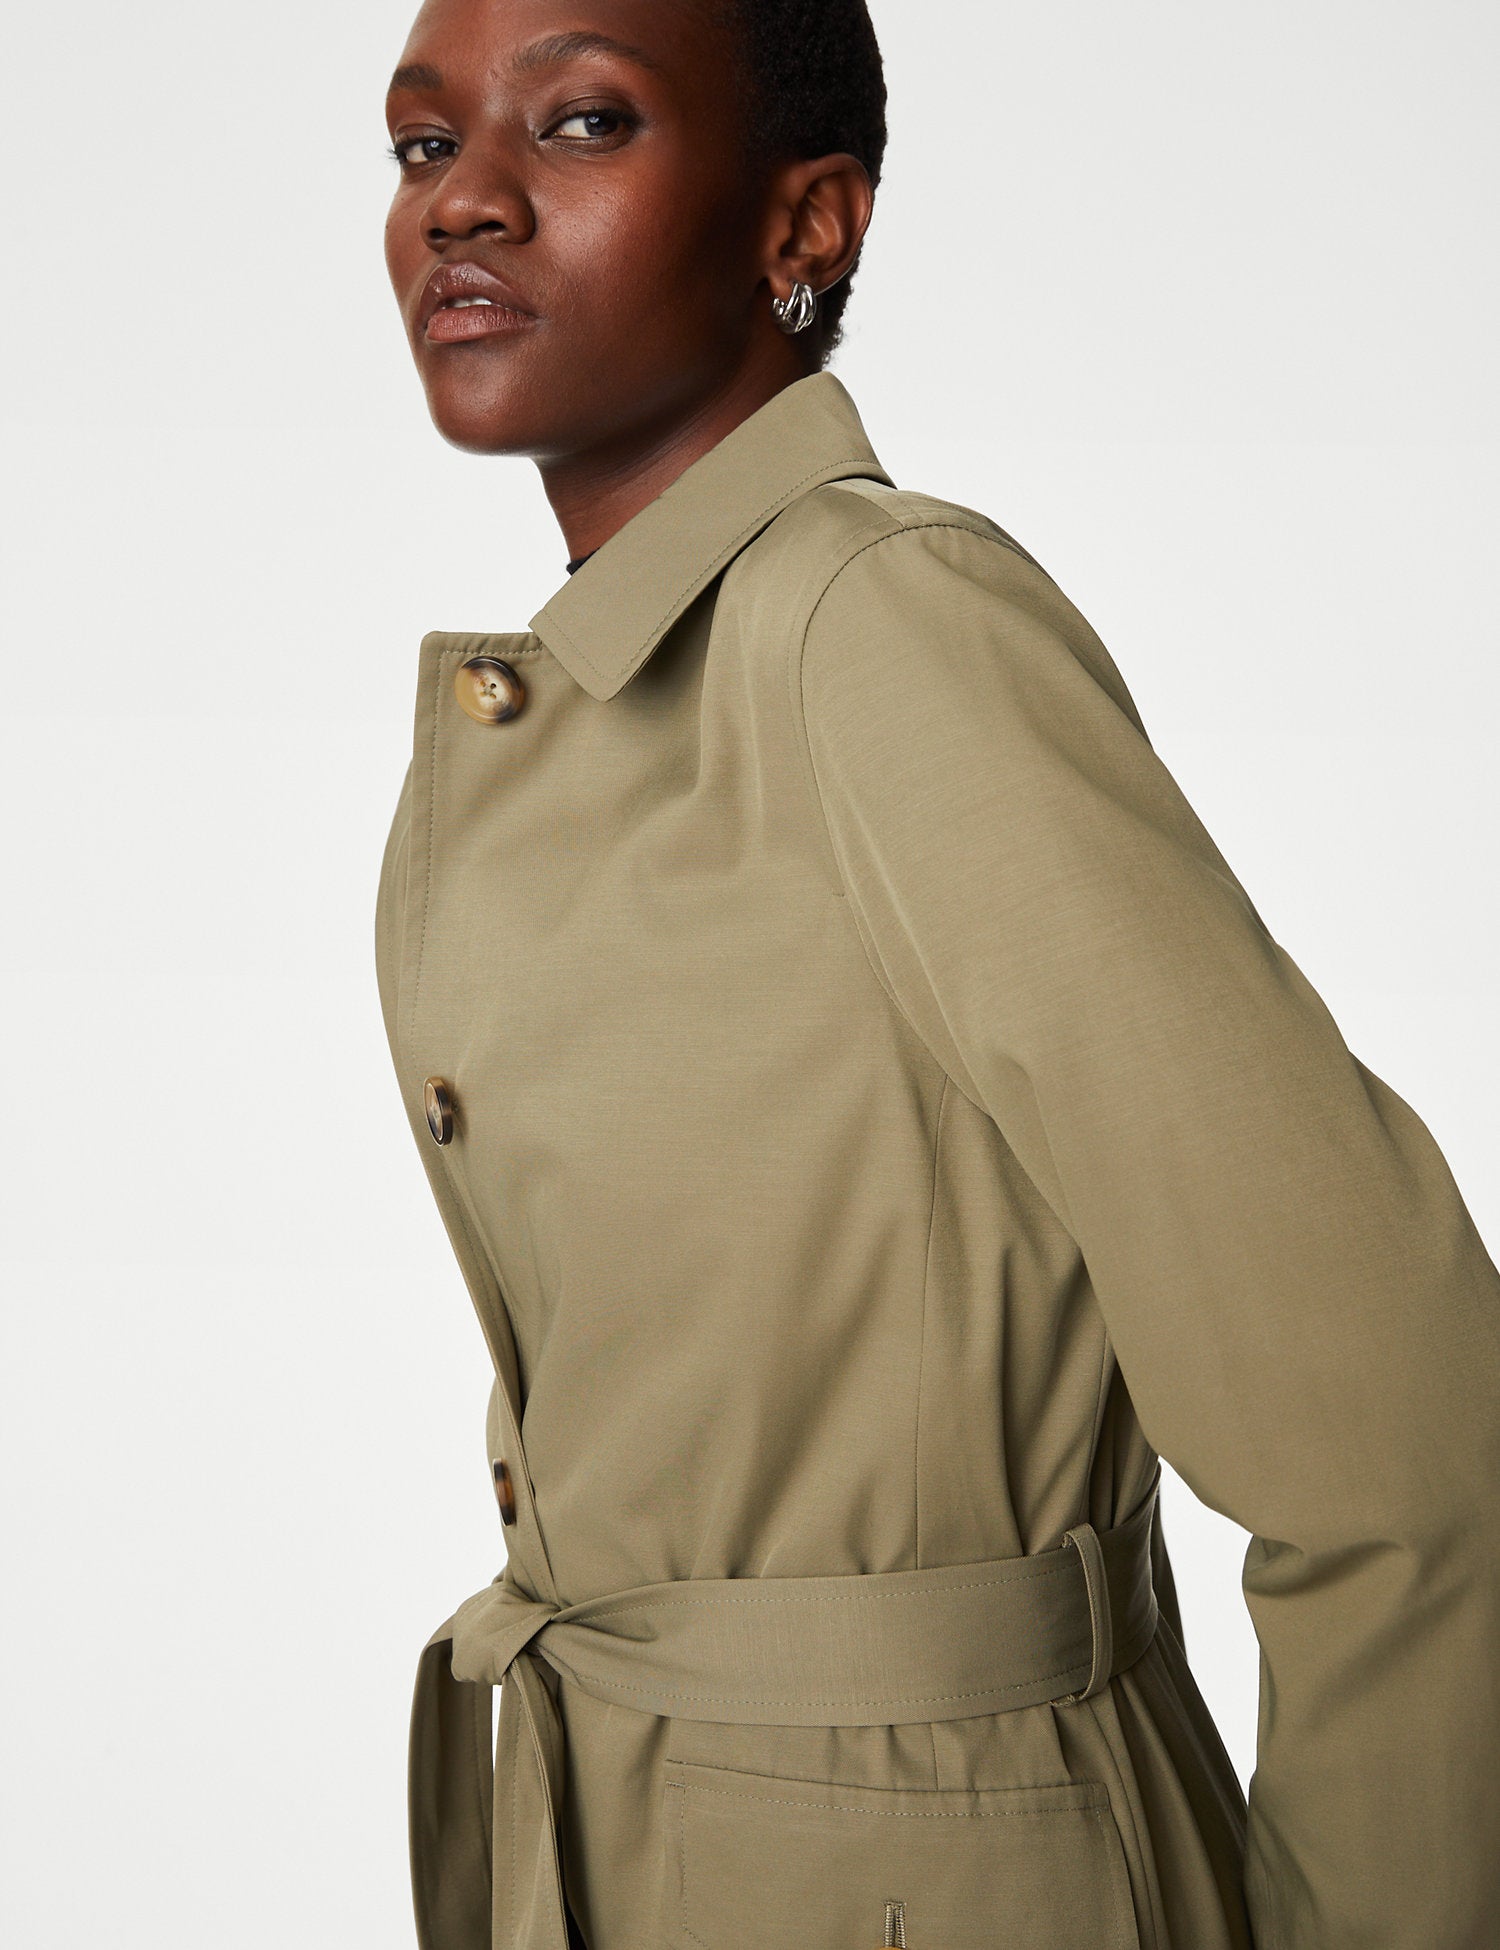 Stormwear Belted Single Breasted Trench Coat